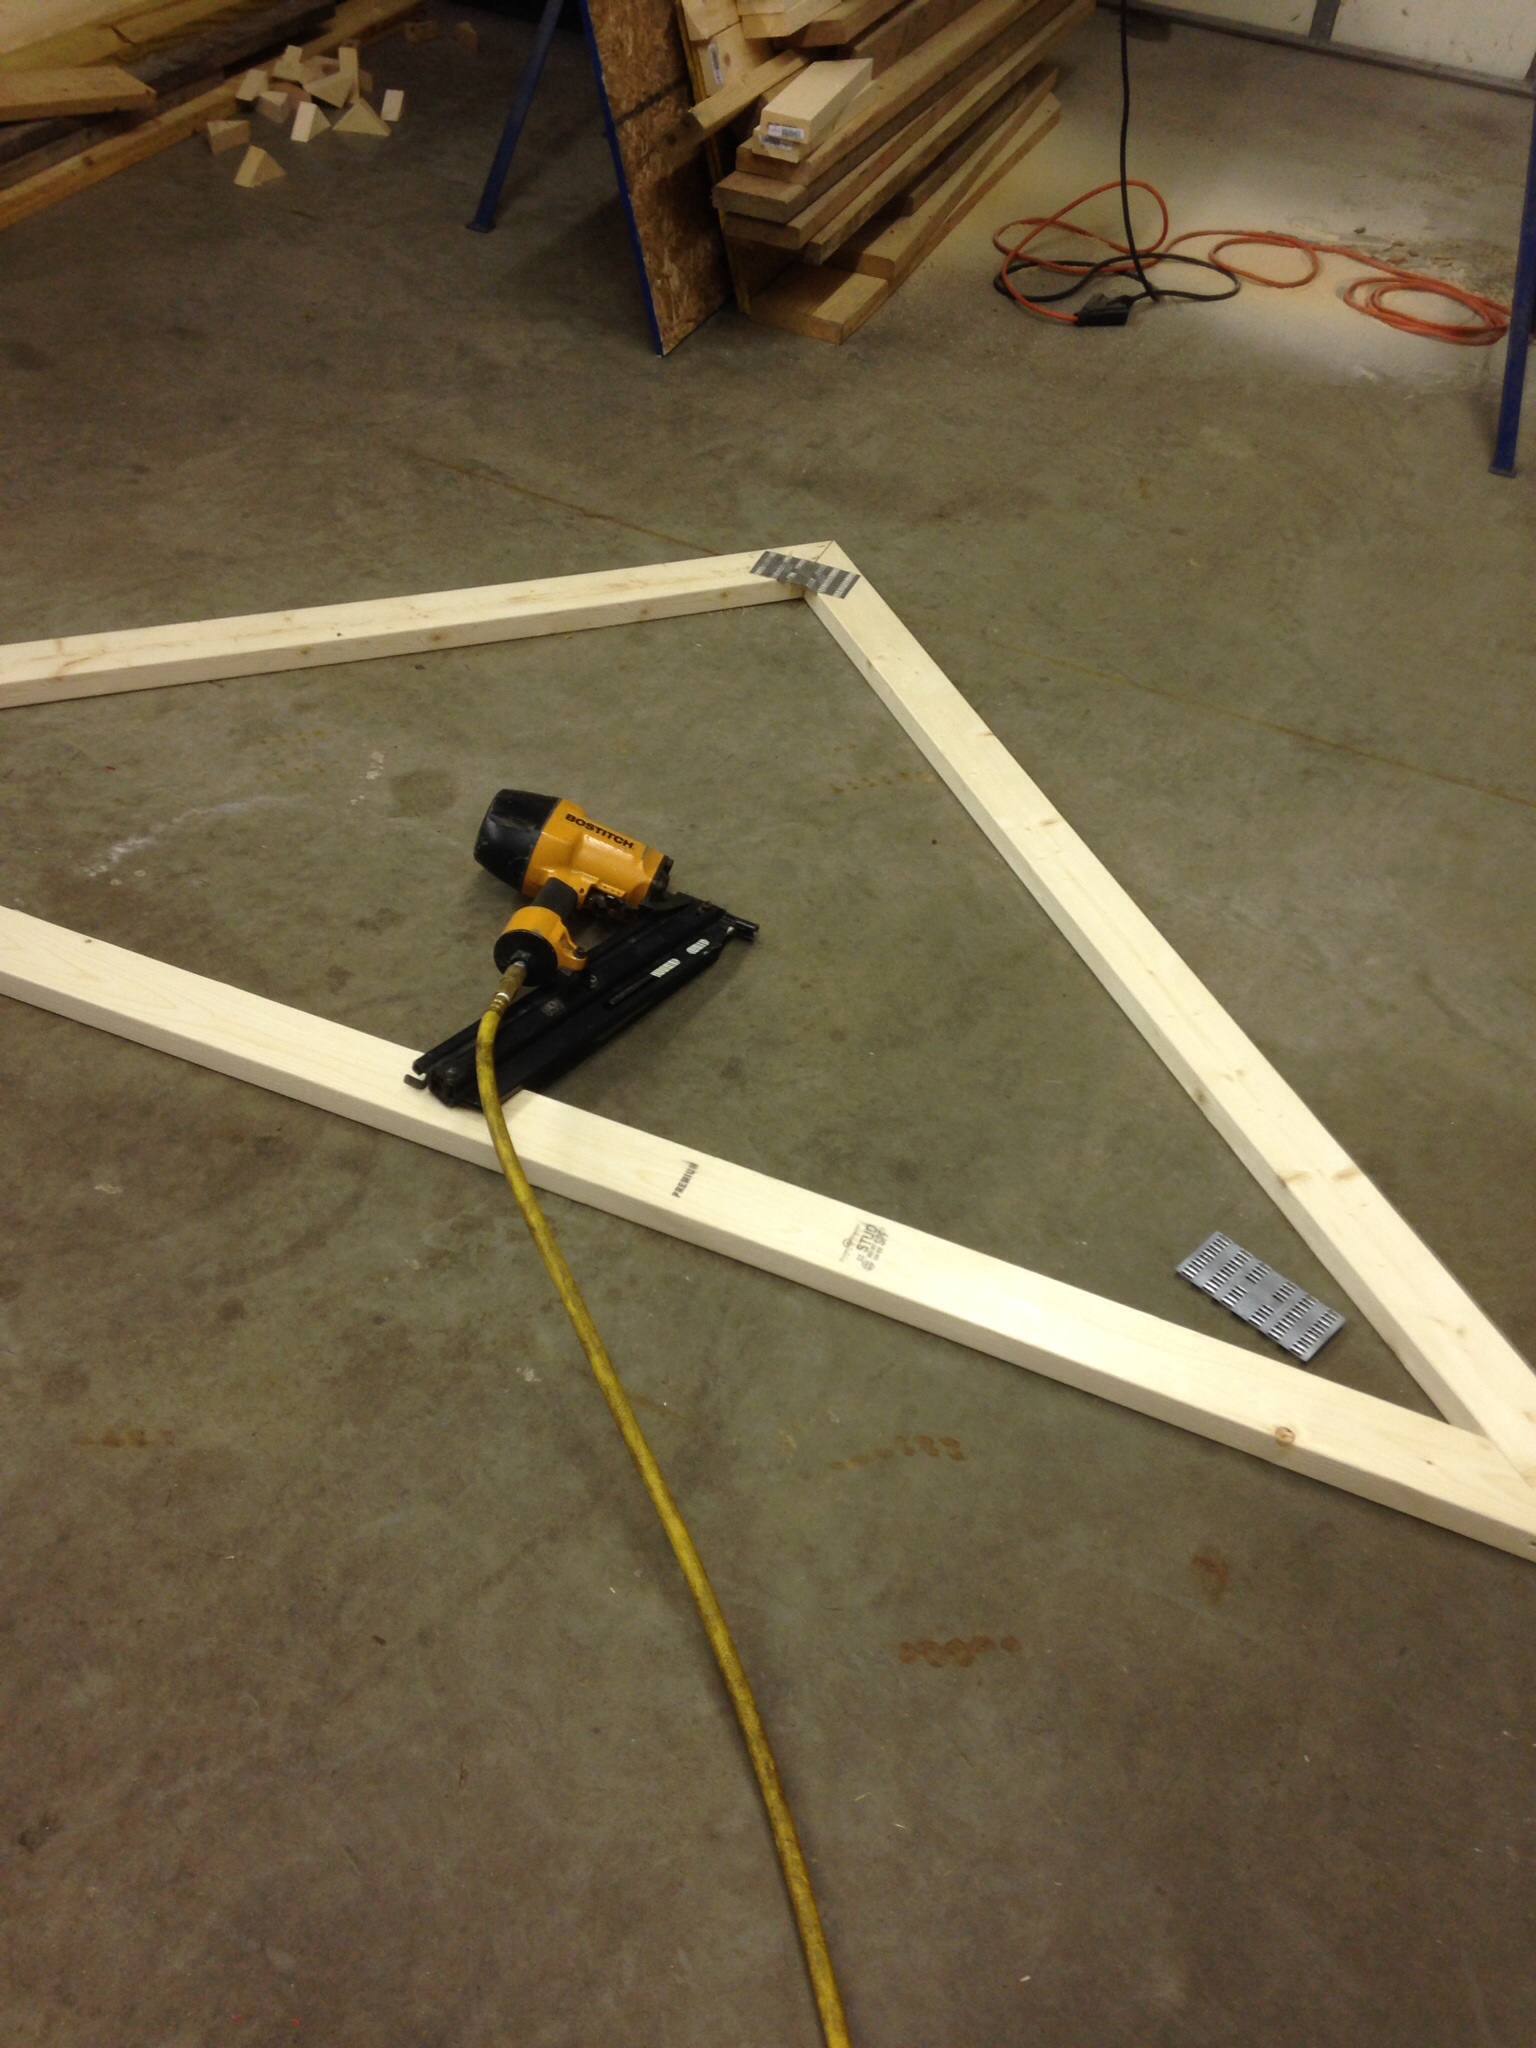 I'm using truss plates and framing nails.